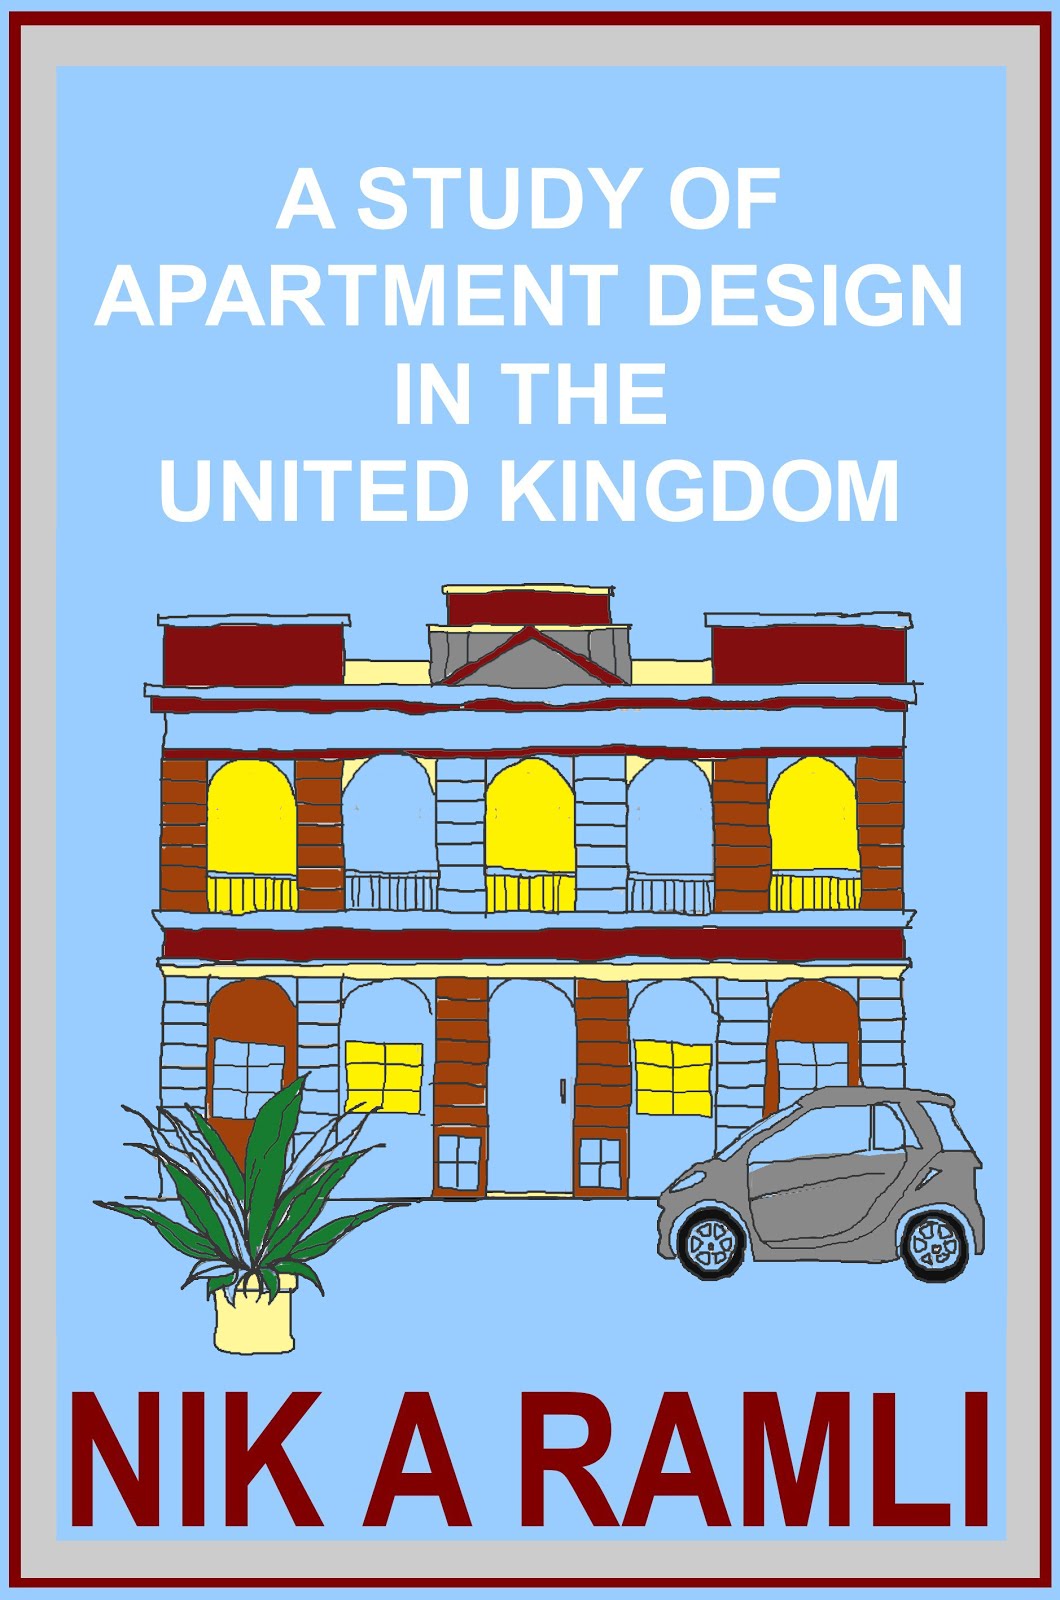 A STUDY OF APARTMENT DESIGN IN THE UNITED KINGDOM